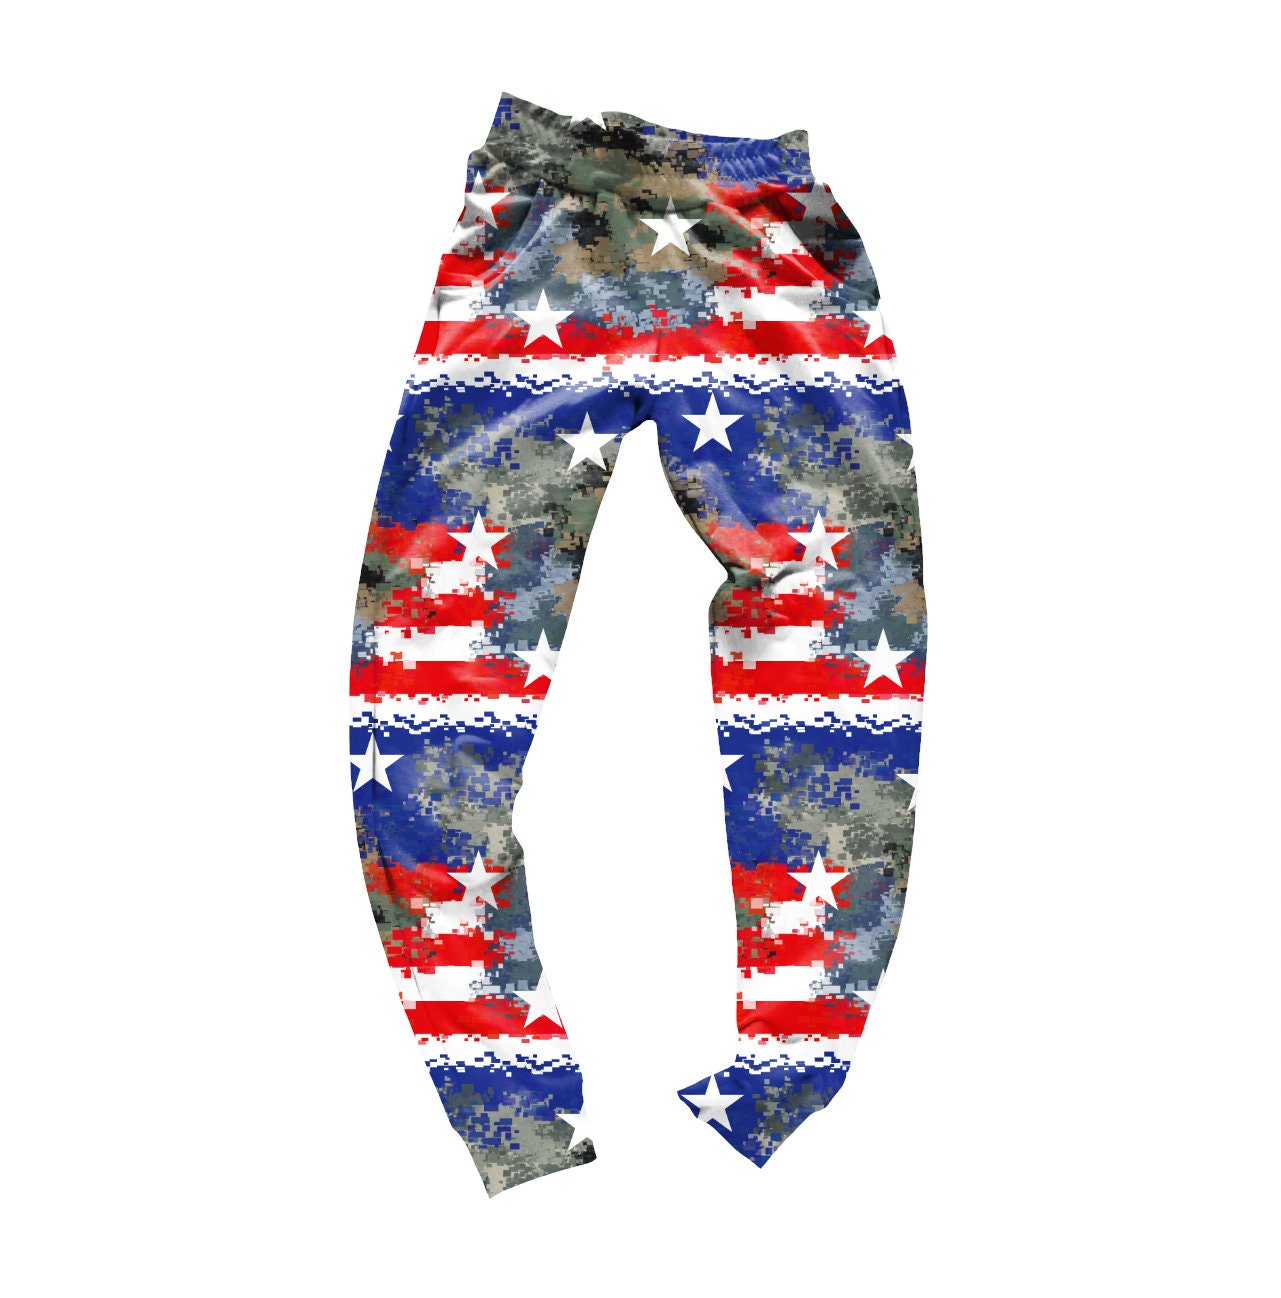 Joggers Realistic Mock-up / Pants Mock up / Editable From - Etsy